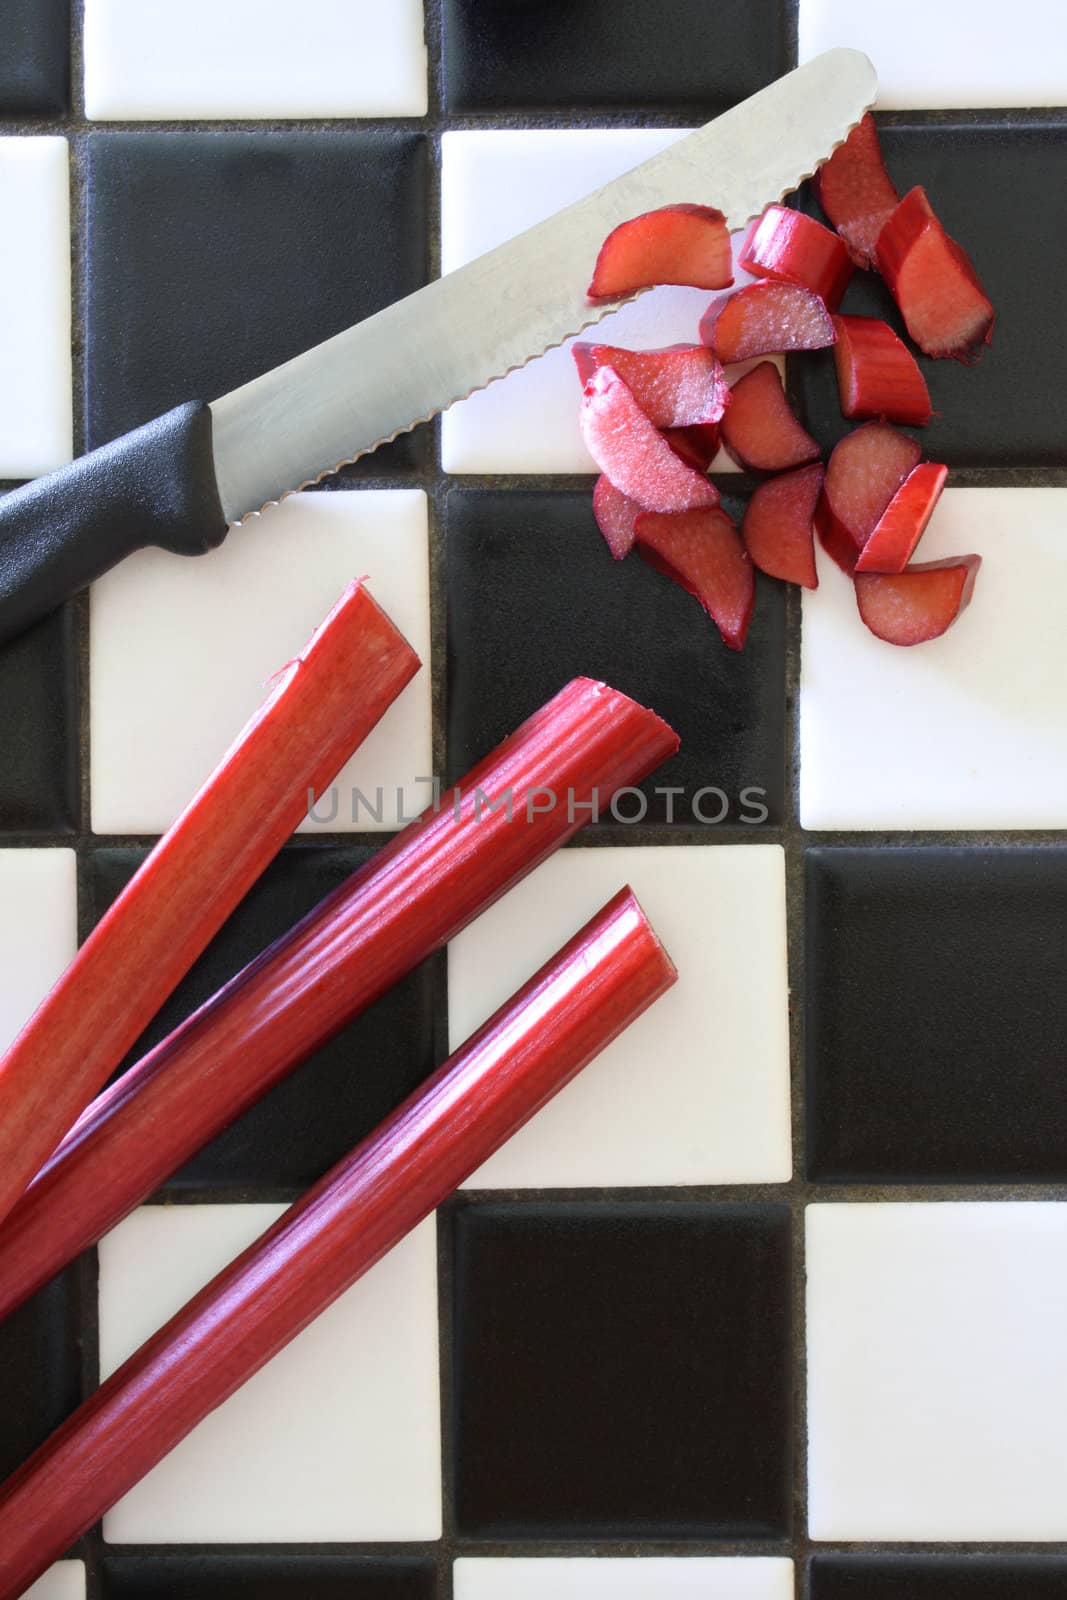 Fresh garden rhubarb, being sliced on a black and white tile counter.
